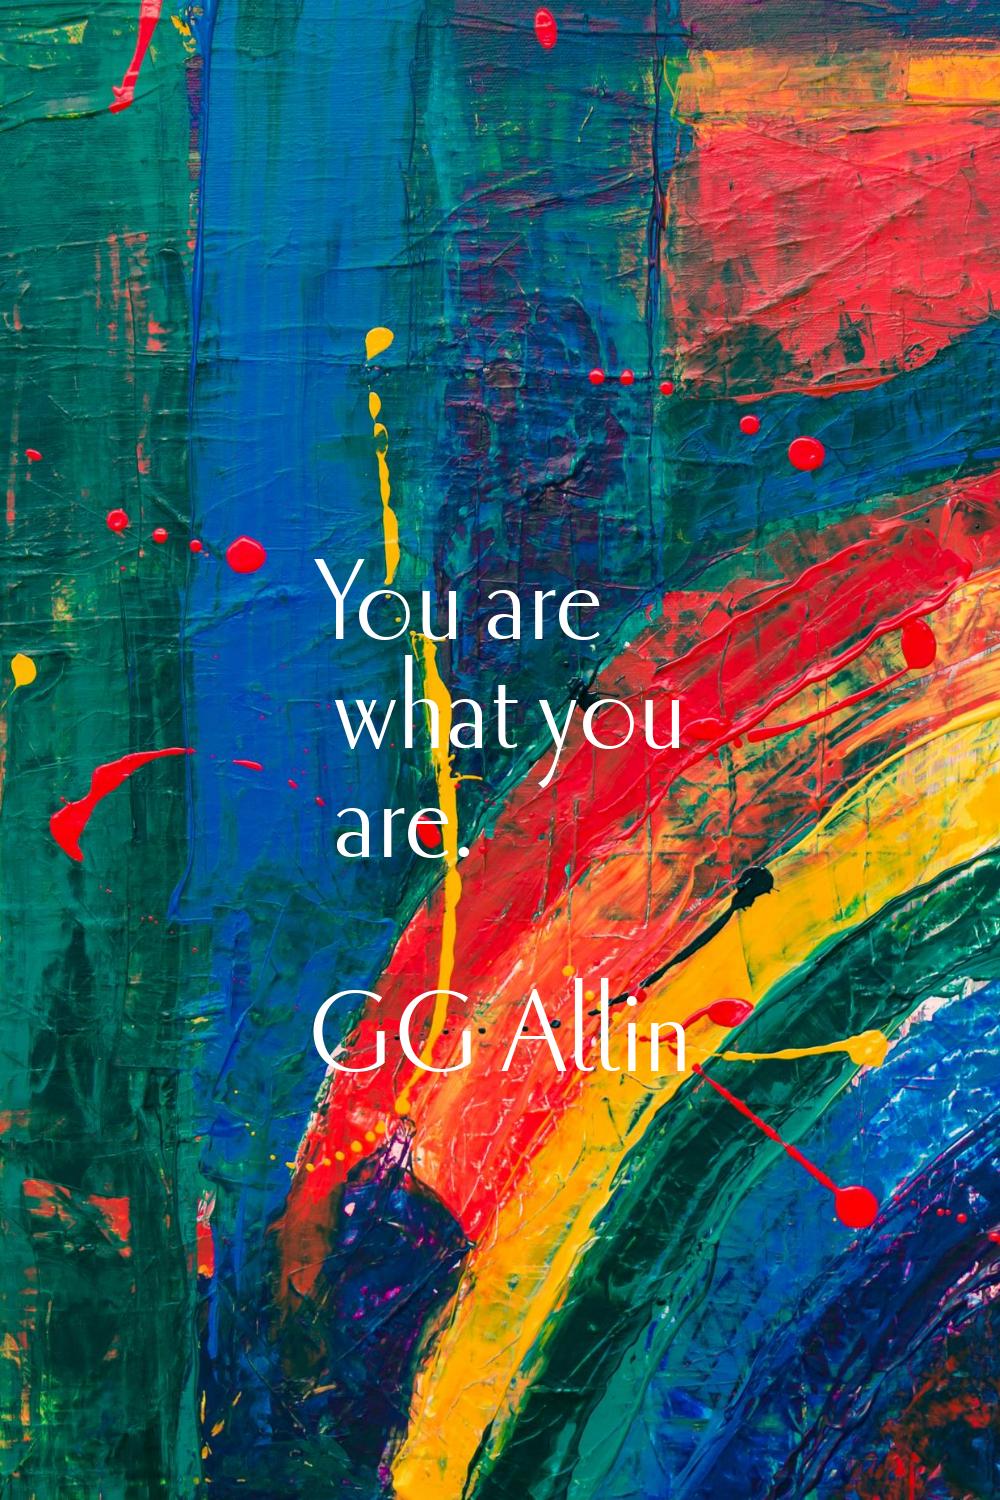 You are what you are.